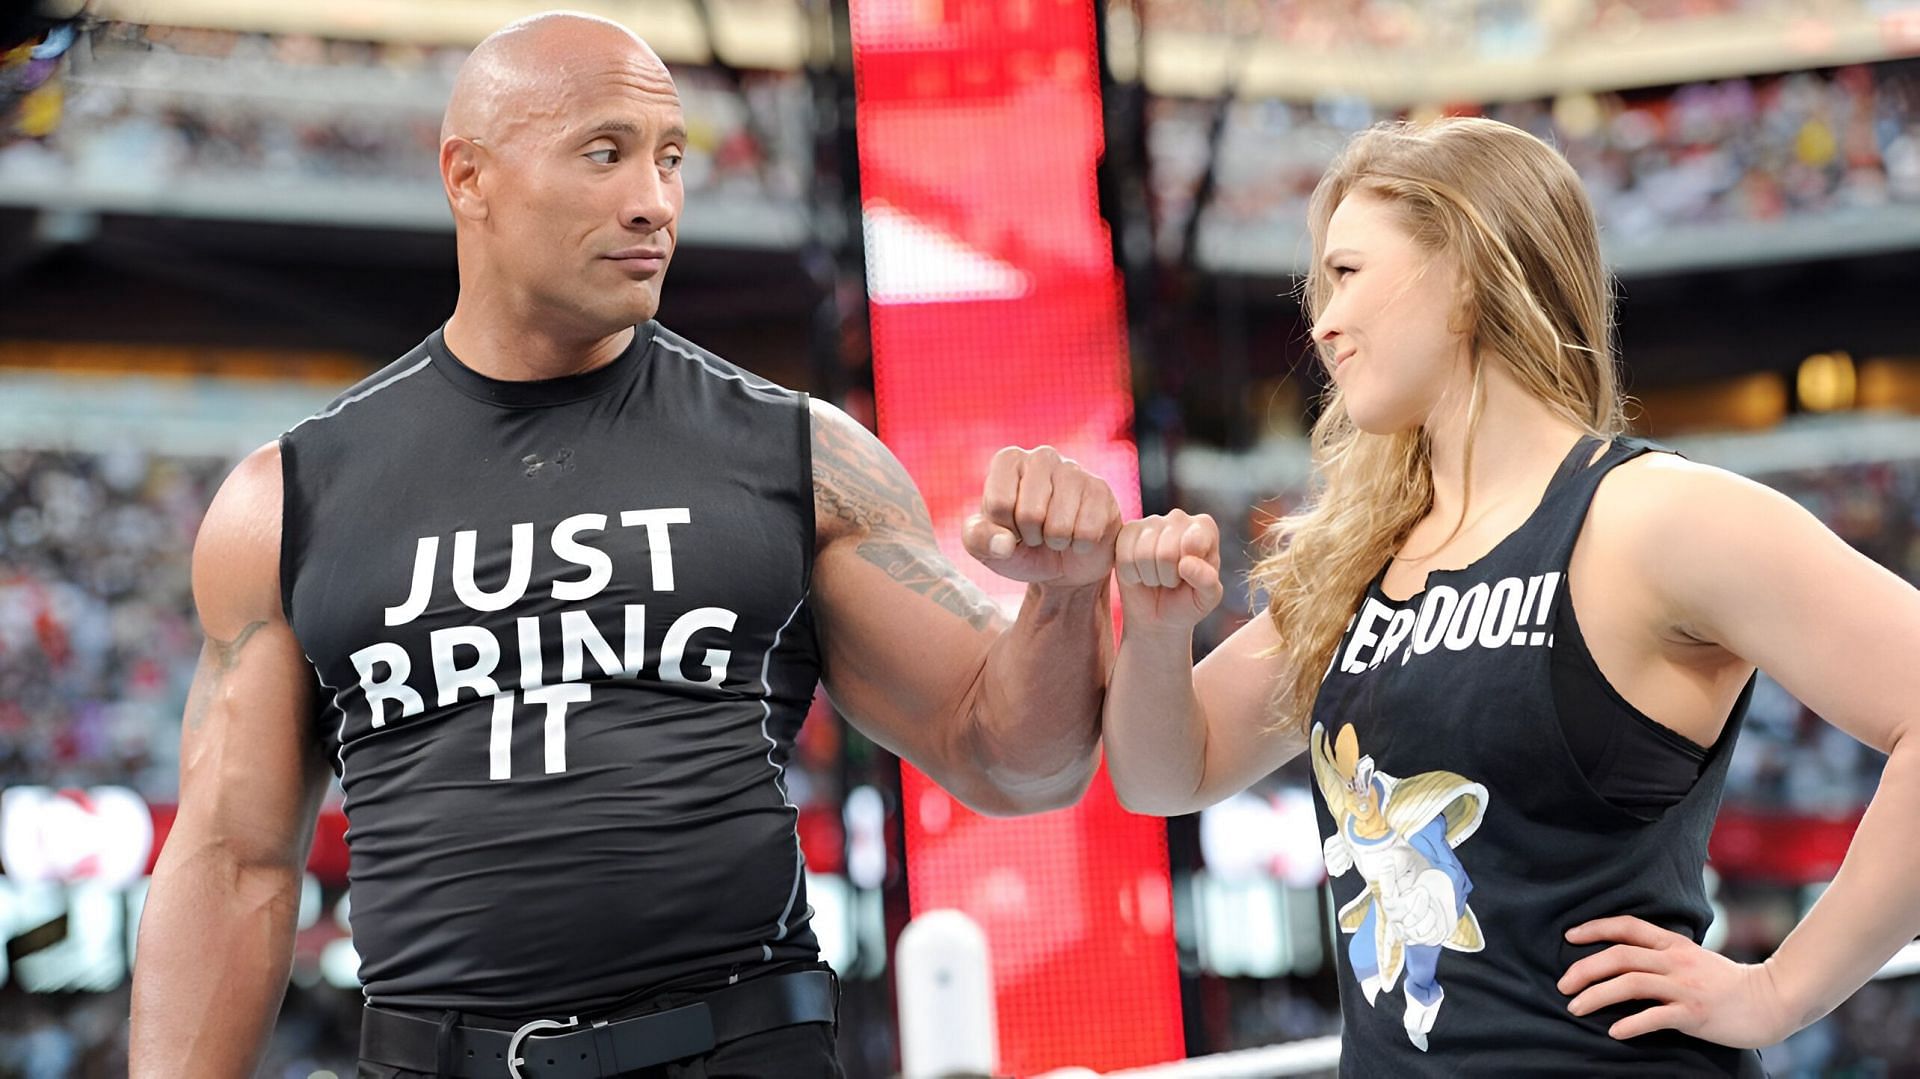 Dwayne Johnson and Ronda Rousey as seen in WrestleMania (Image via WWE)